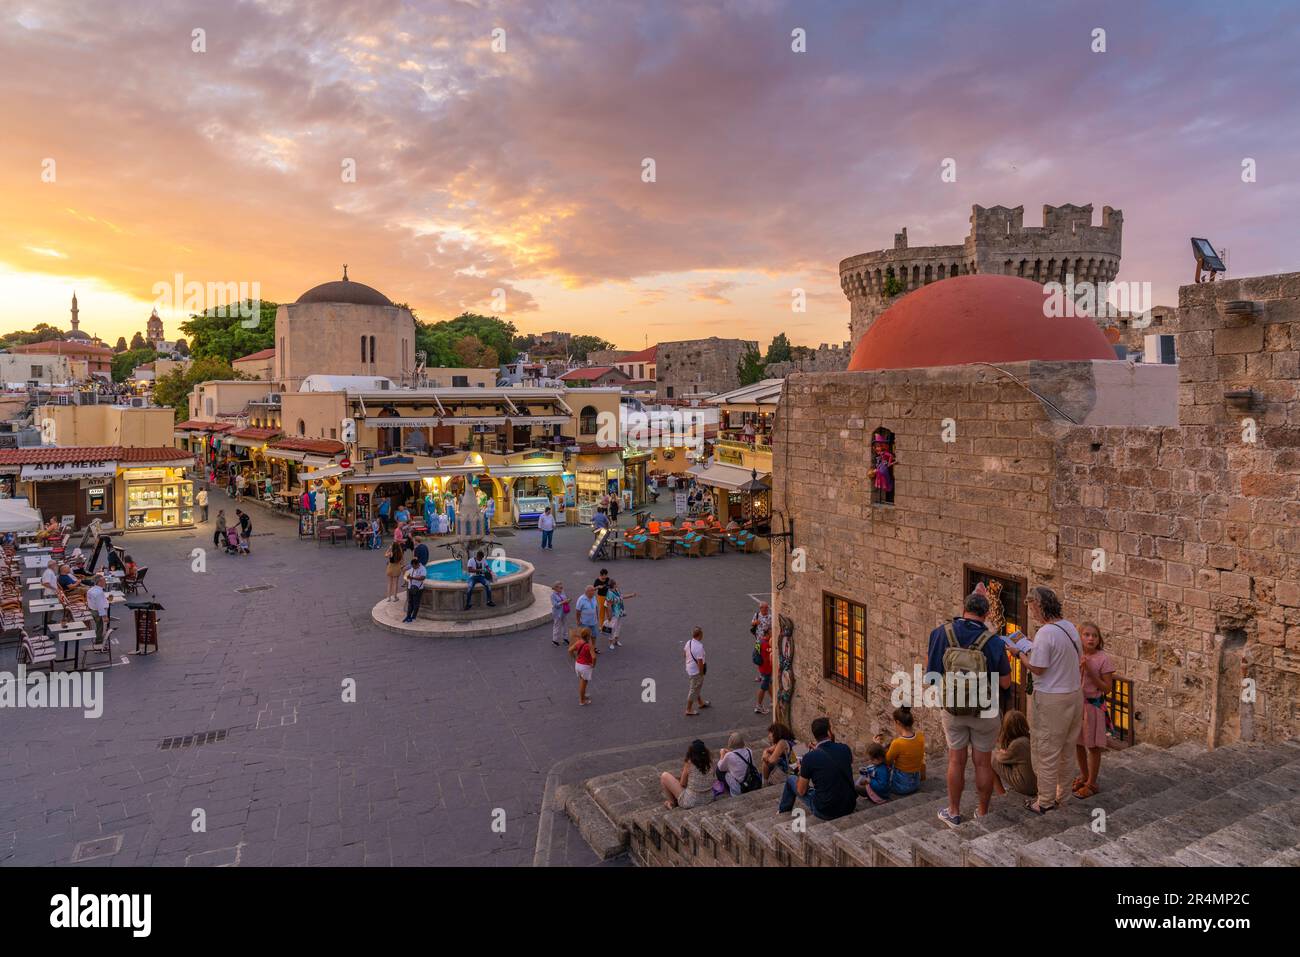 View of Hippocrates Square at sunset, Old Rhodes Town, UNESCO World Heritage Site, Rhodes, Dodecanese, Greek Islands, Greece, Europe Stock Photo